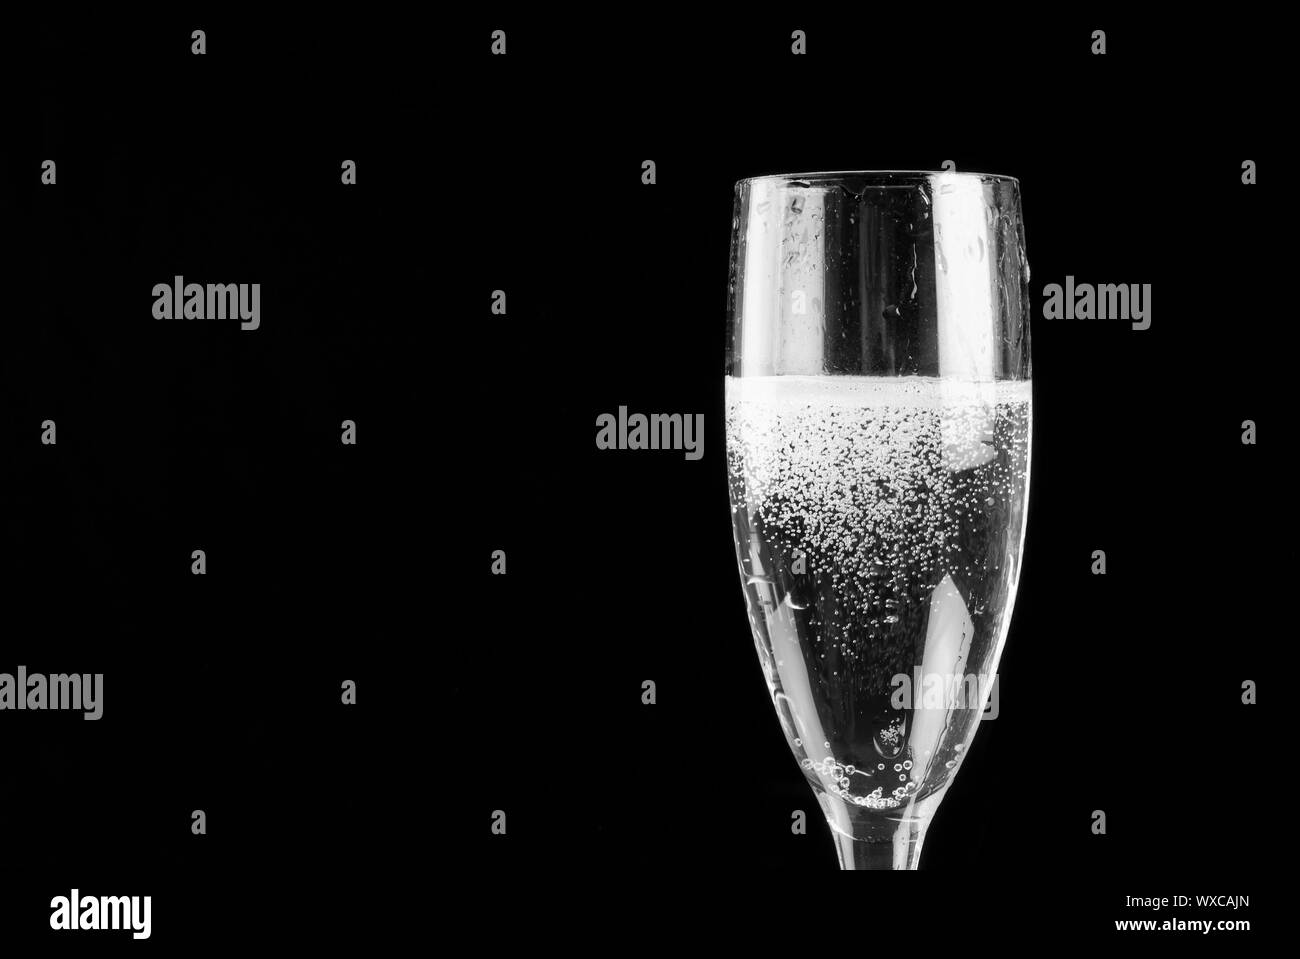 Champagne flute filled with sparkling wine Stock Photo